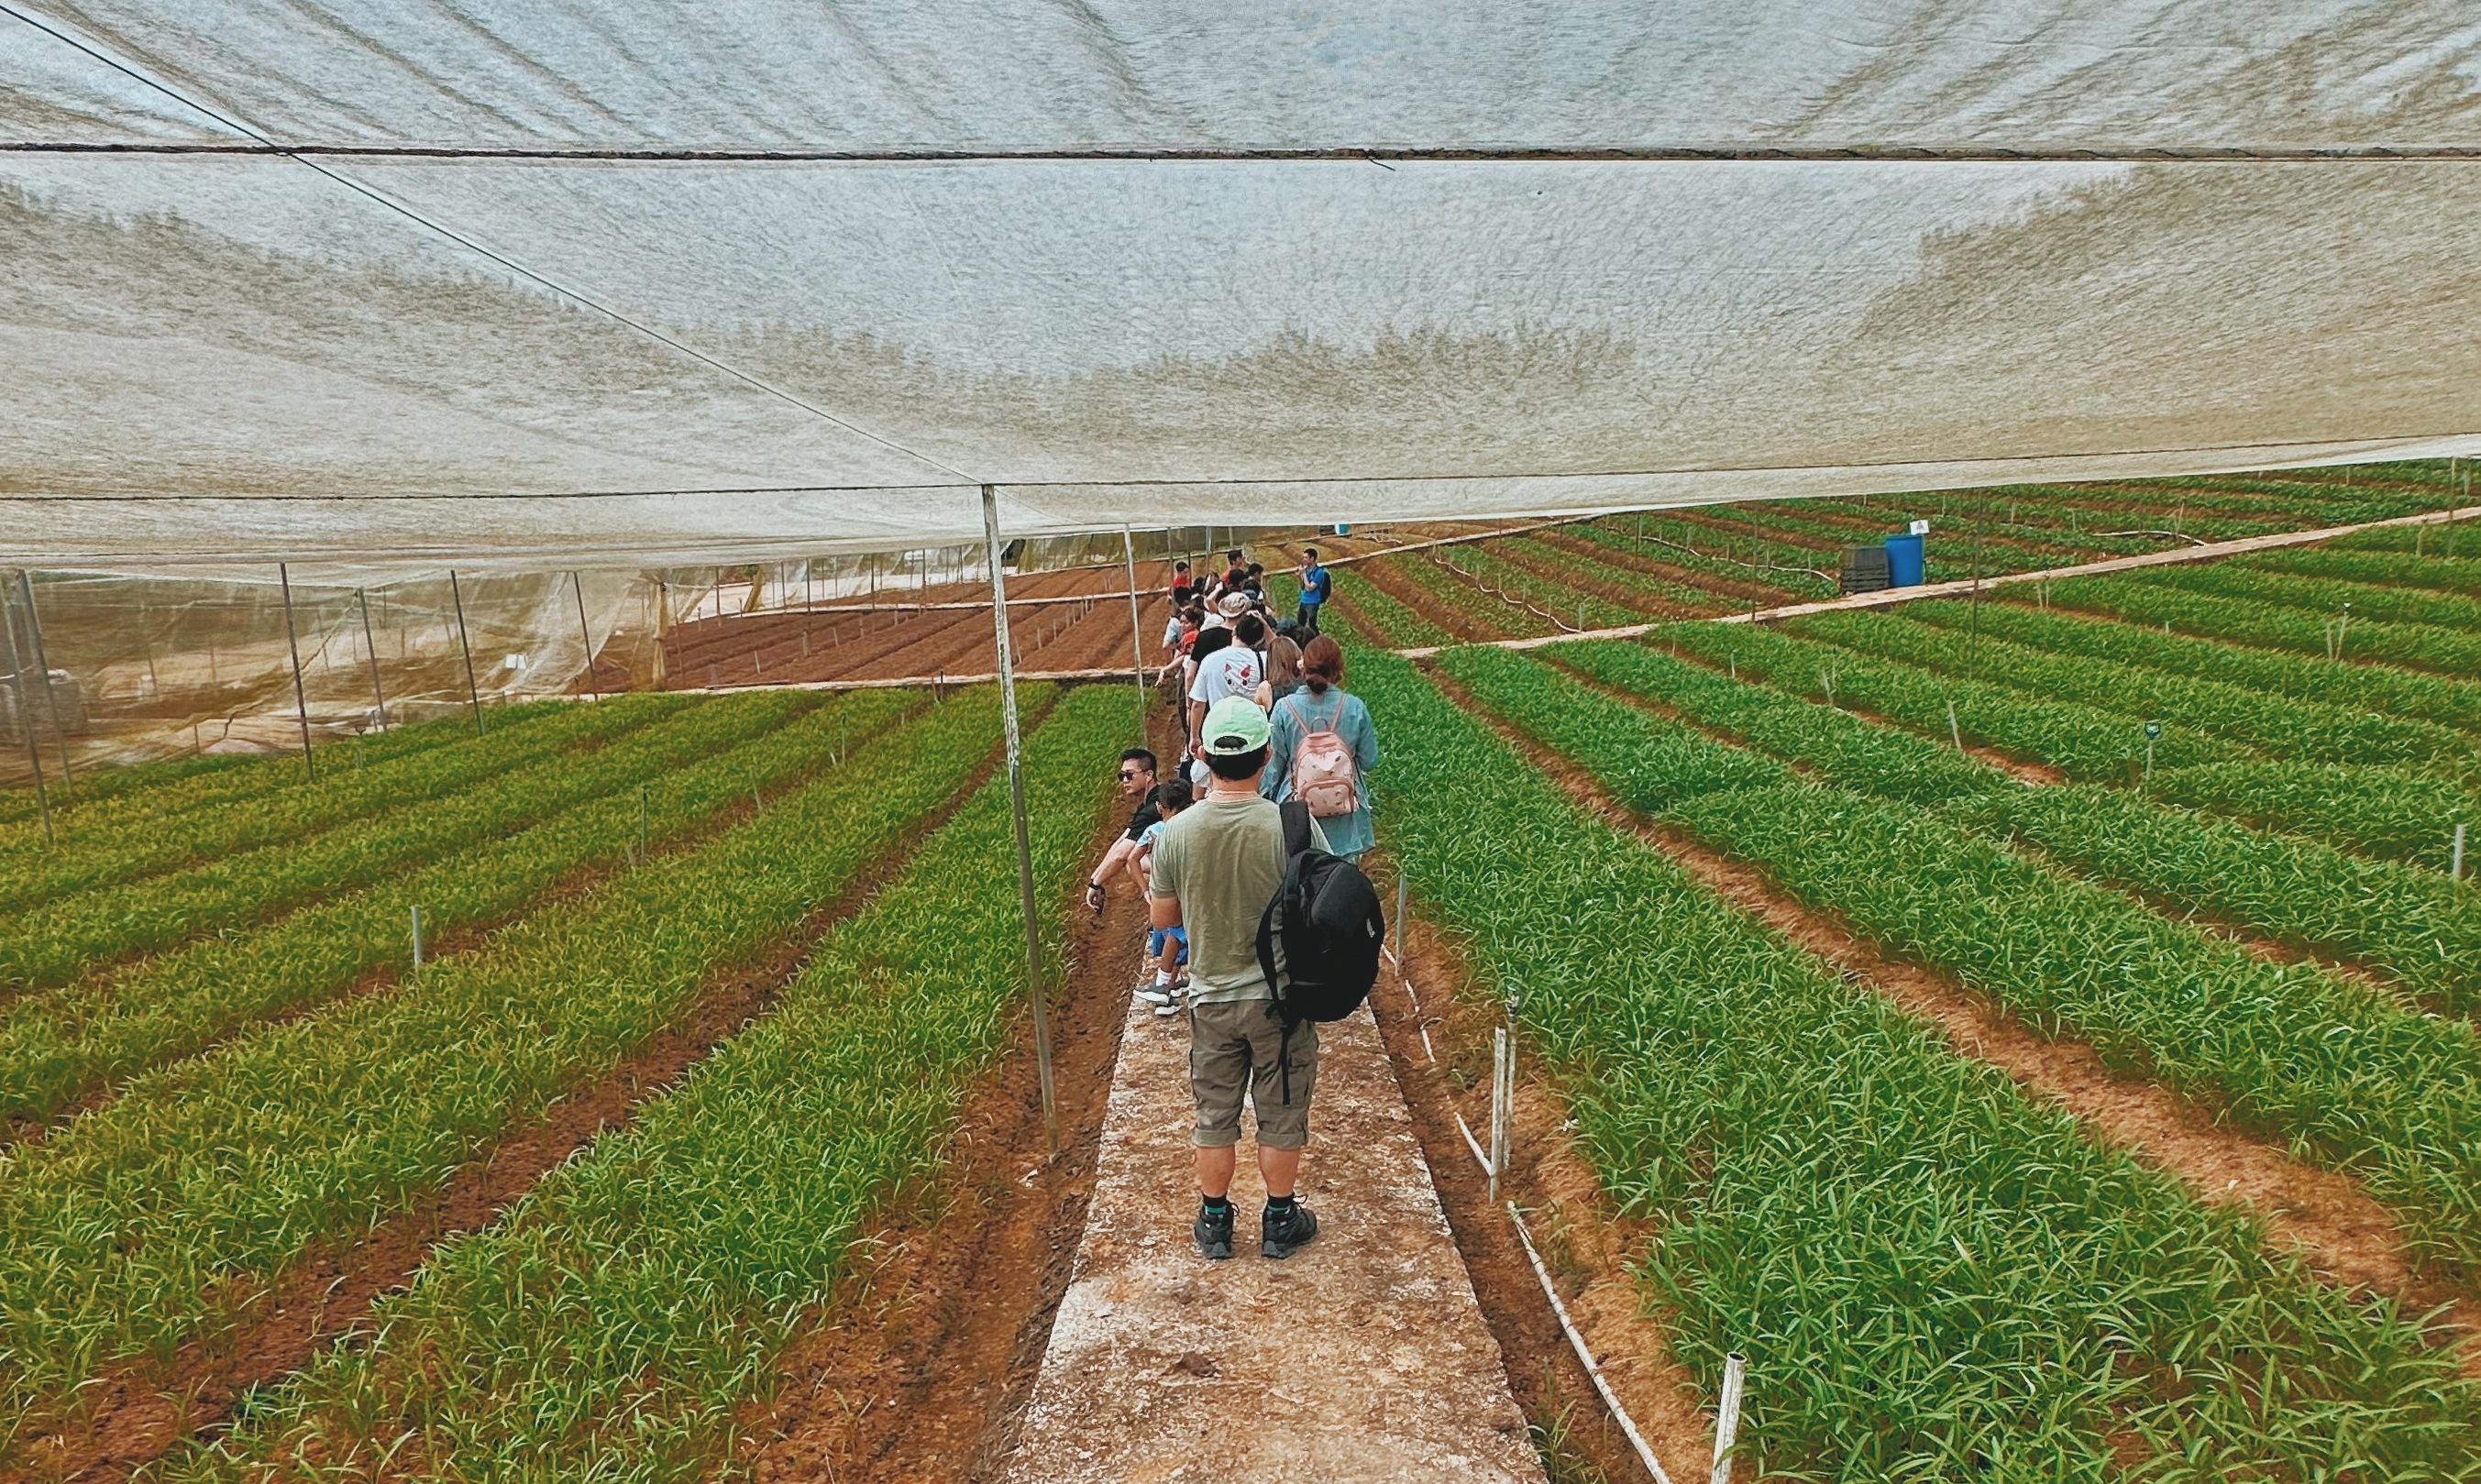  Wide shot of tourists walking single-file down a pathway in a farm, surrounded by rows of greens 